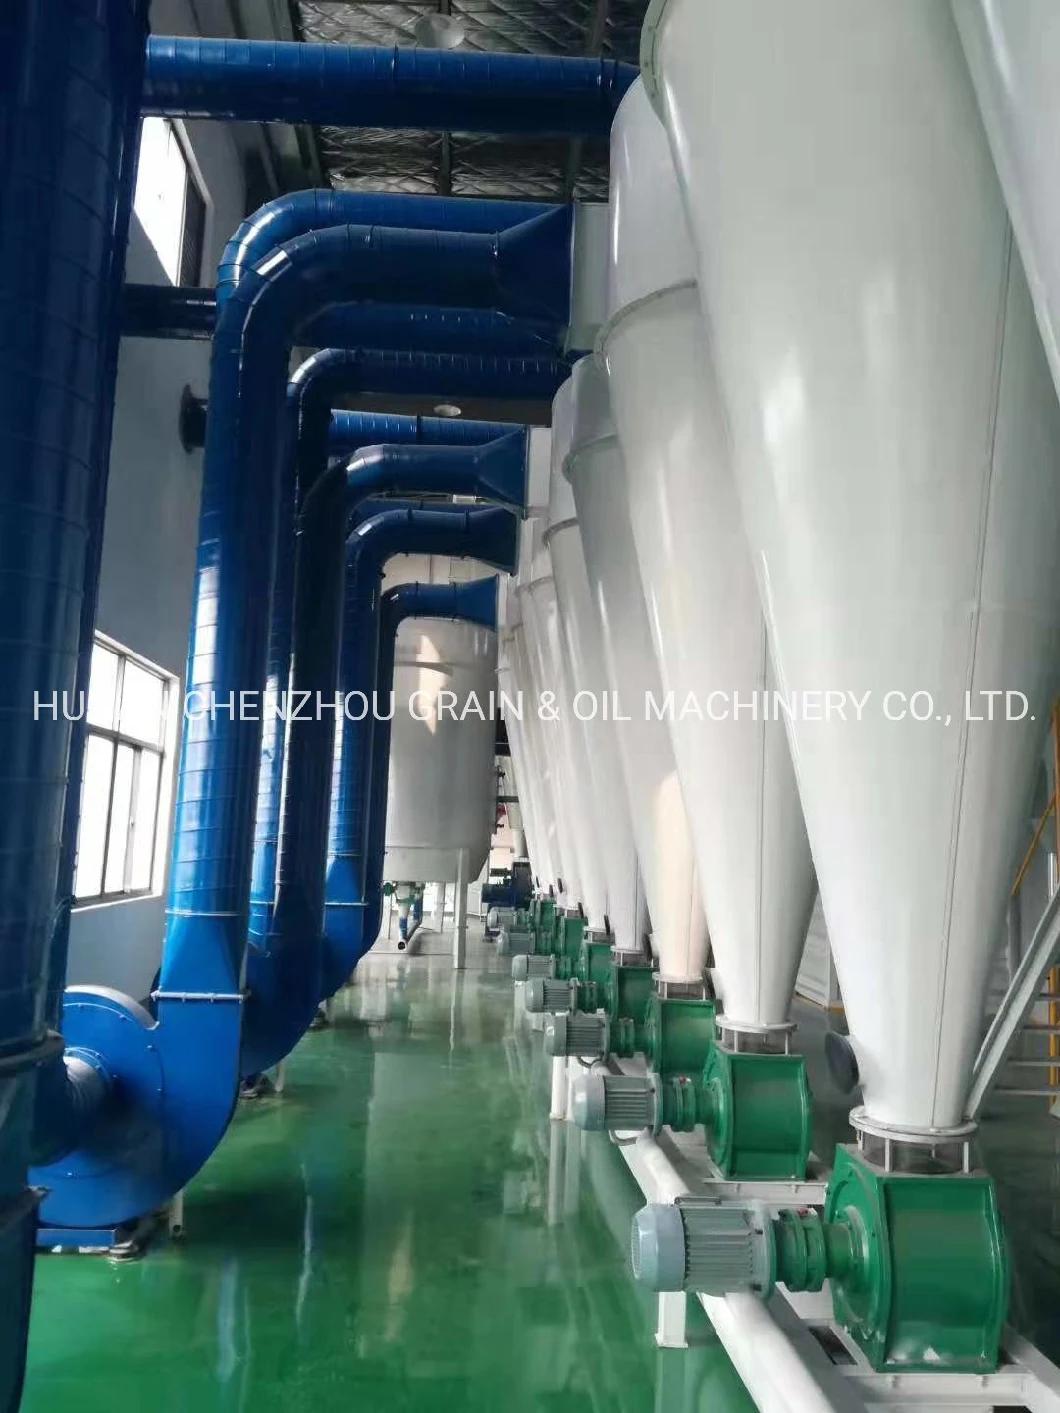 200 Ton Per Day Parboil Rice Mill Plant Automatic Rice Milling Machine for Rice Plant Line